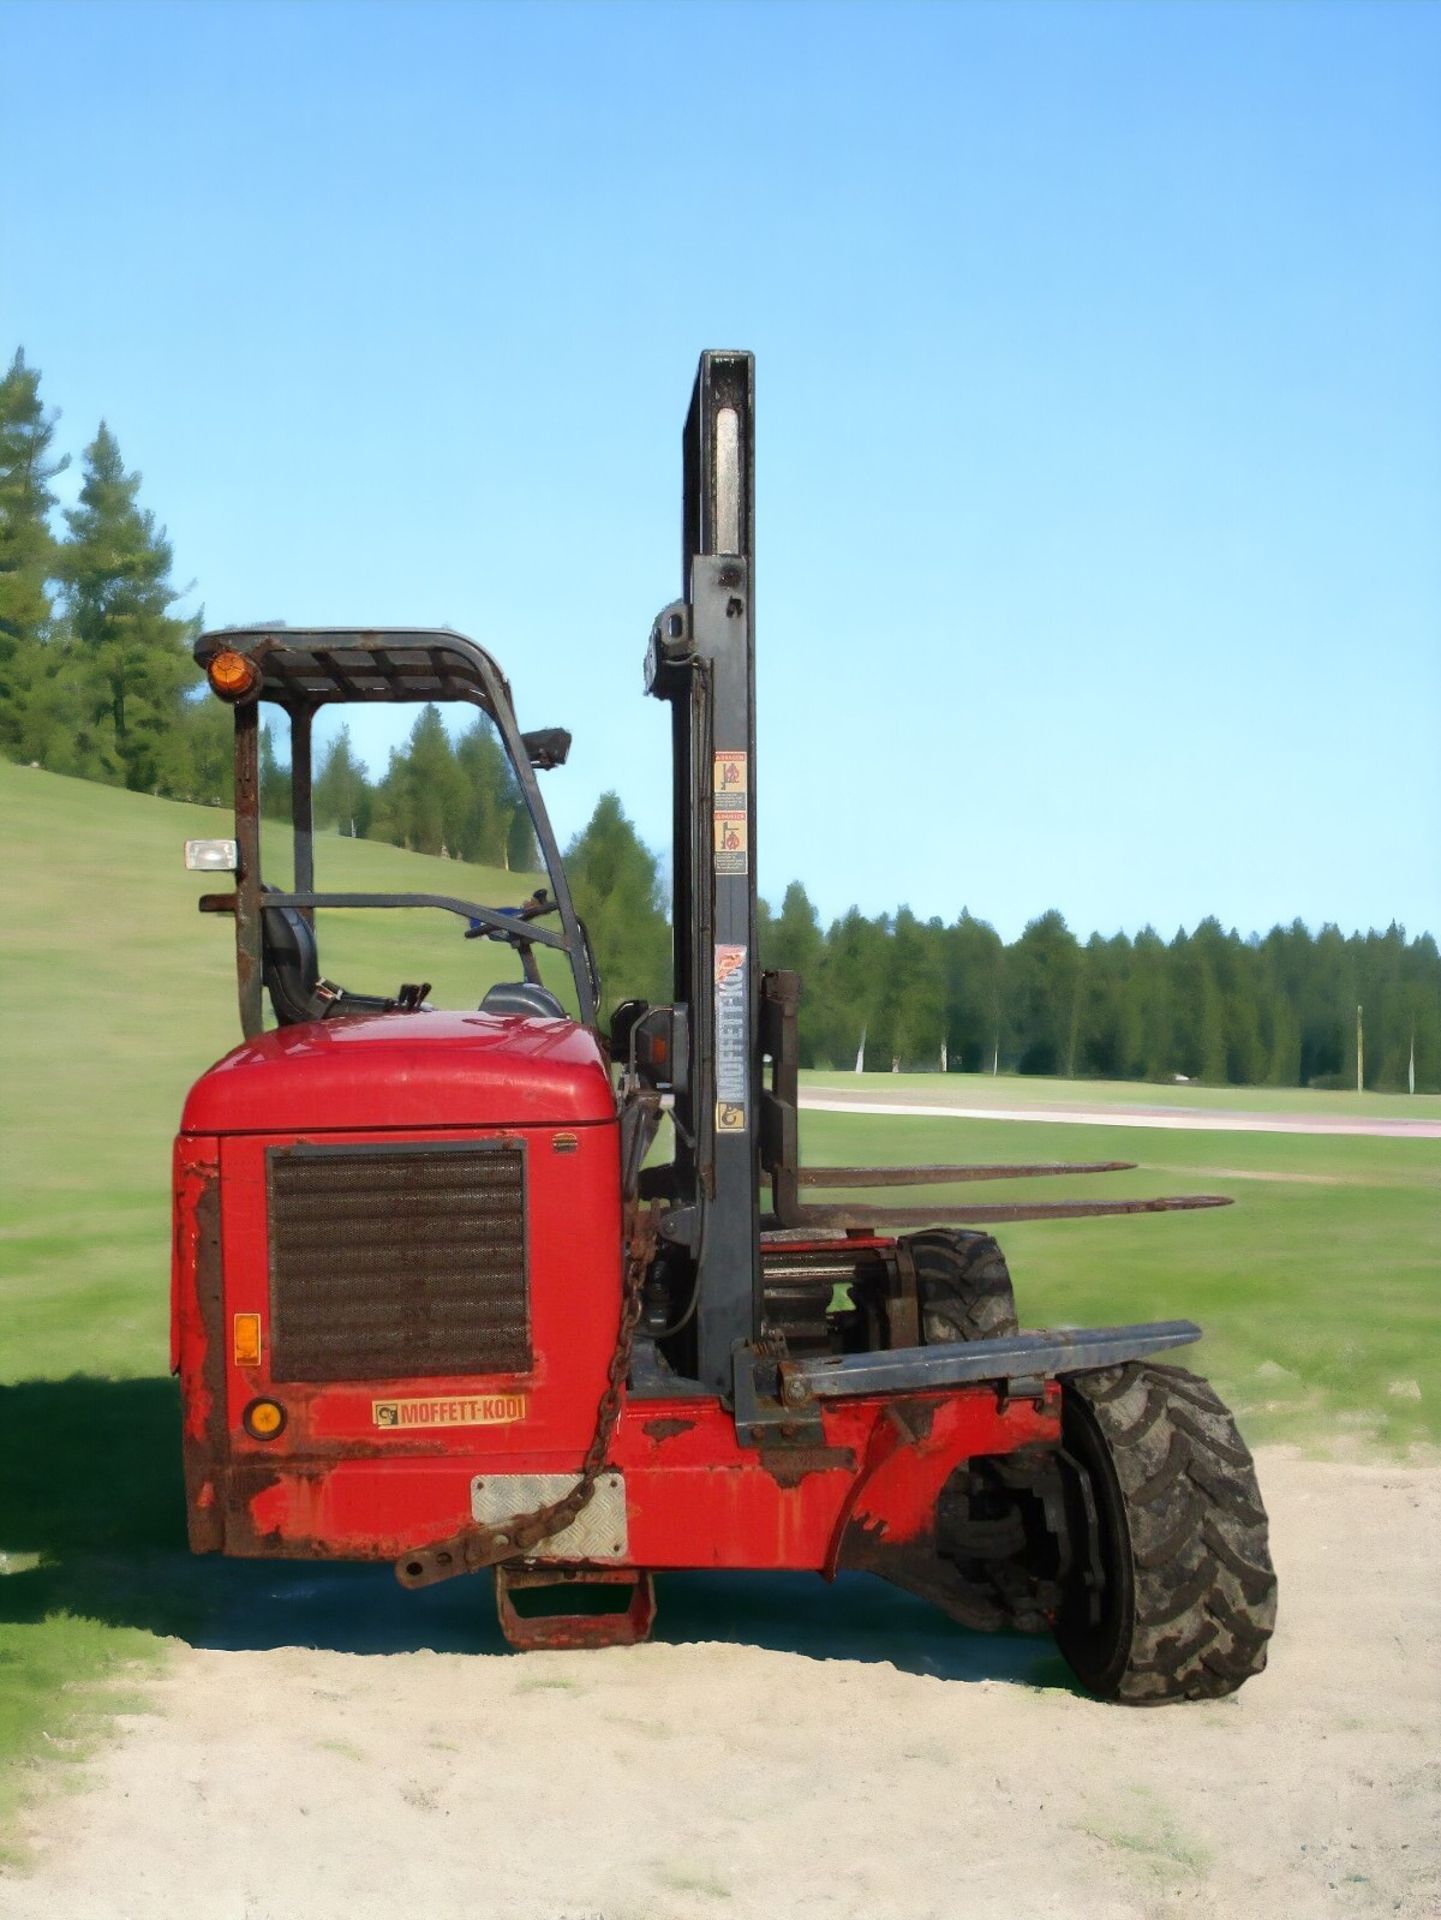 TERRAIN WITH THE MIGHTY MOFFETT MOUNTY M8 25.4 FORKLIFT - Image 11 of 14